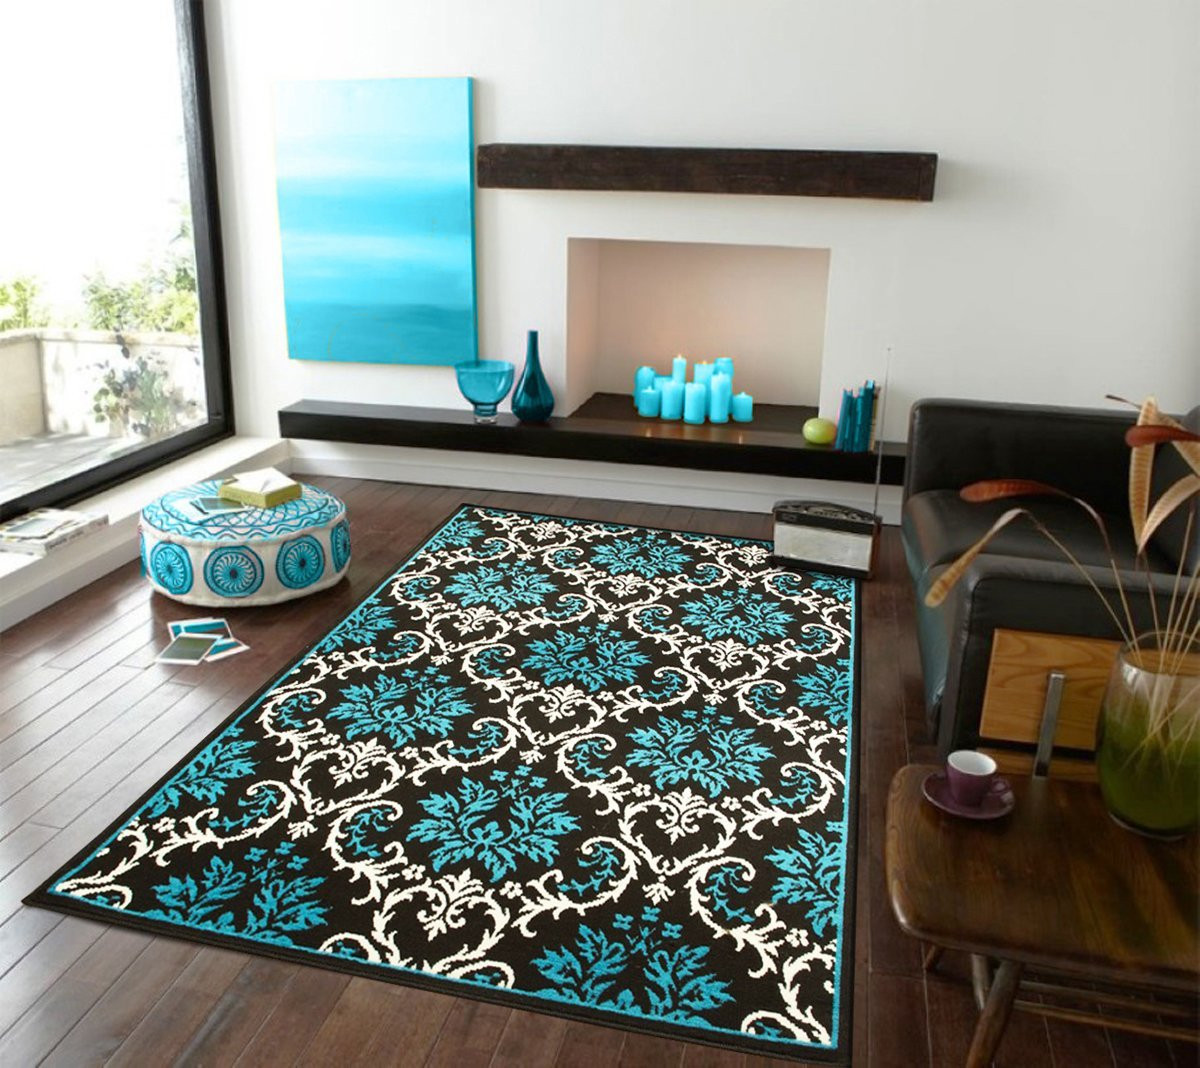 5X8 Rug In Living Room
 Buy Luxury Contemporary Rugs For Living Room Black Blue